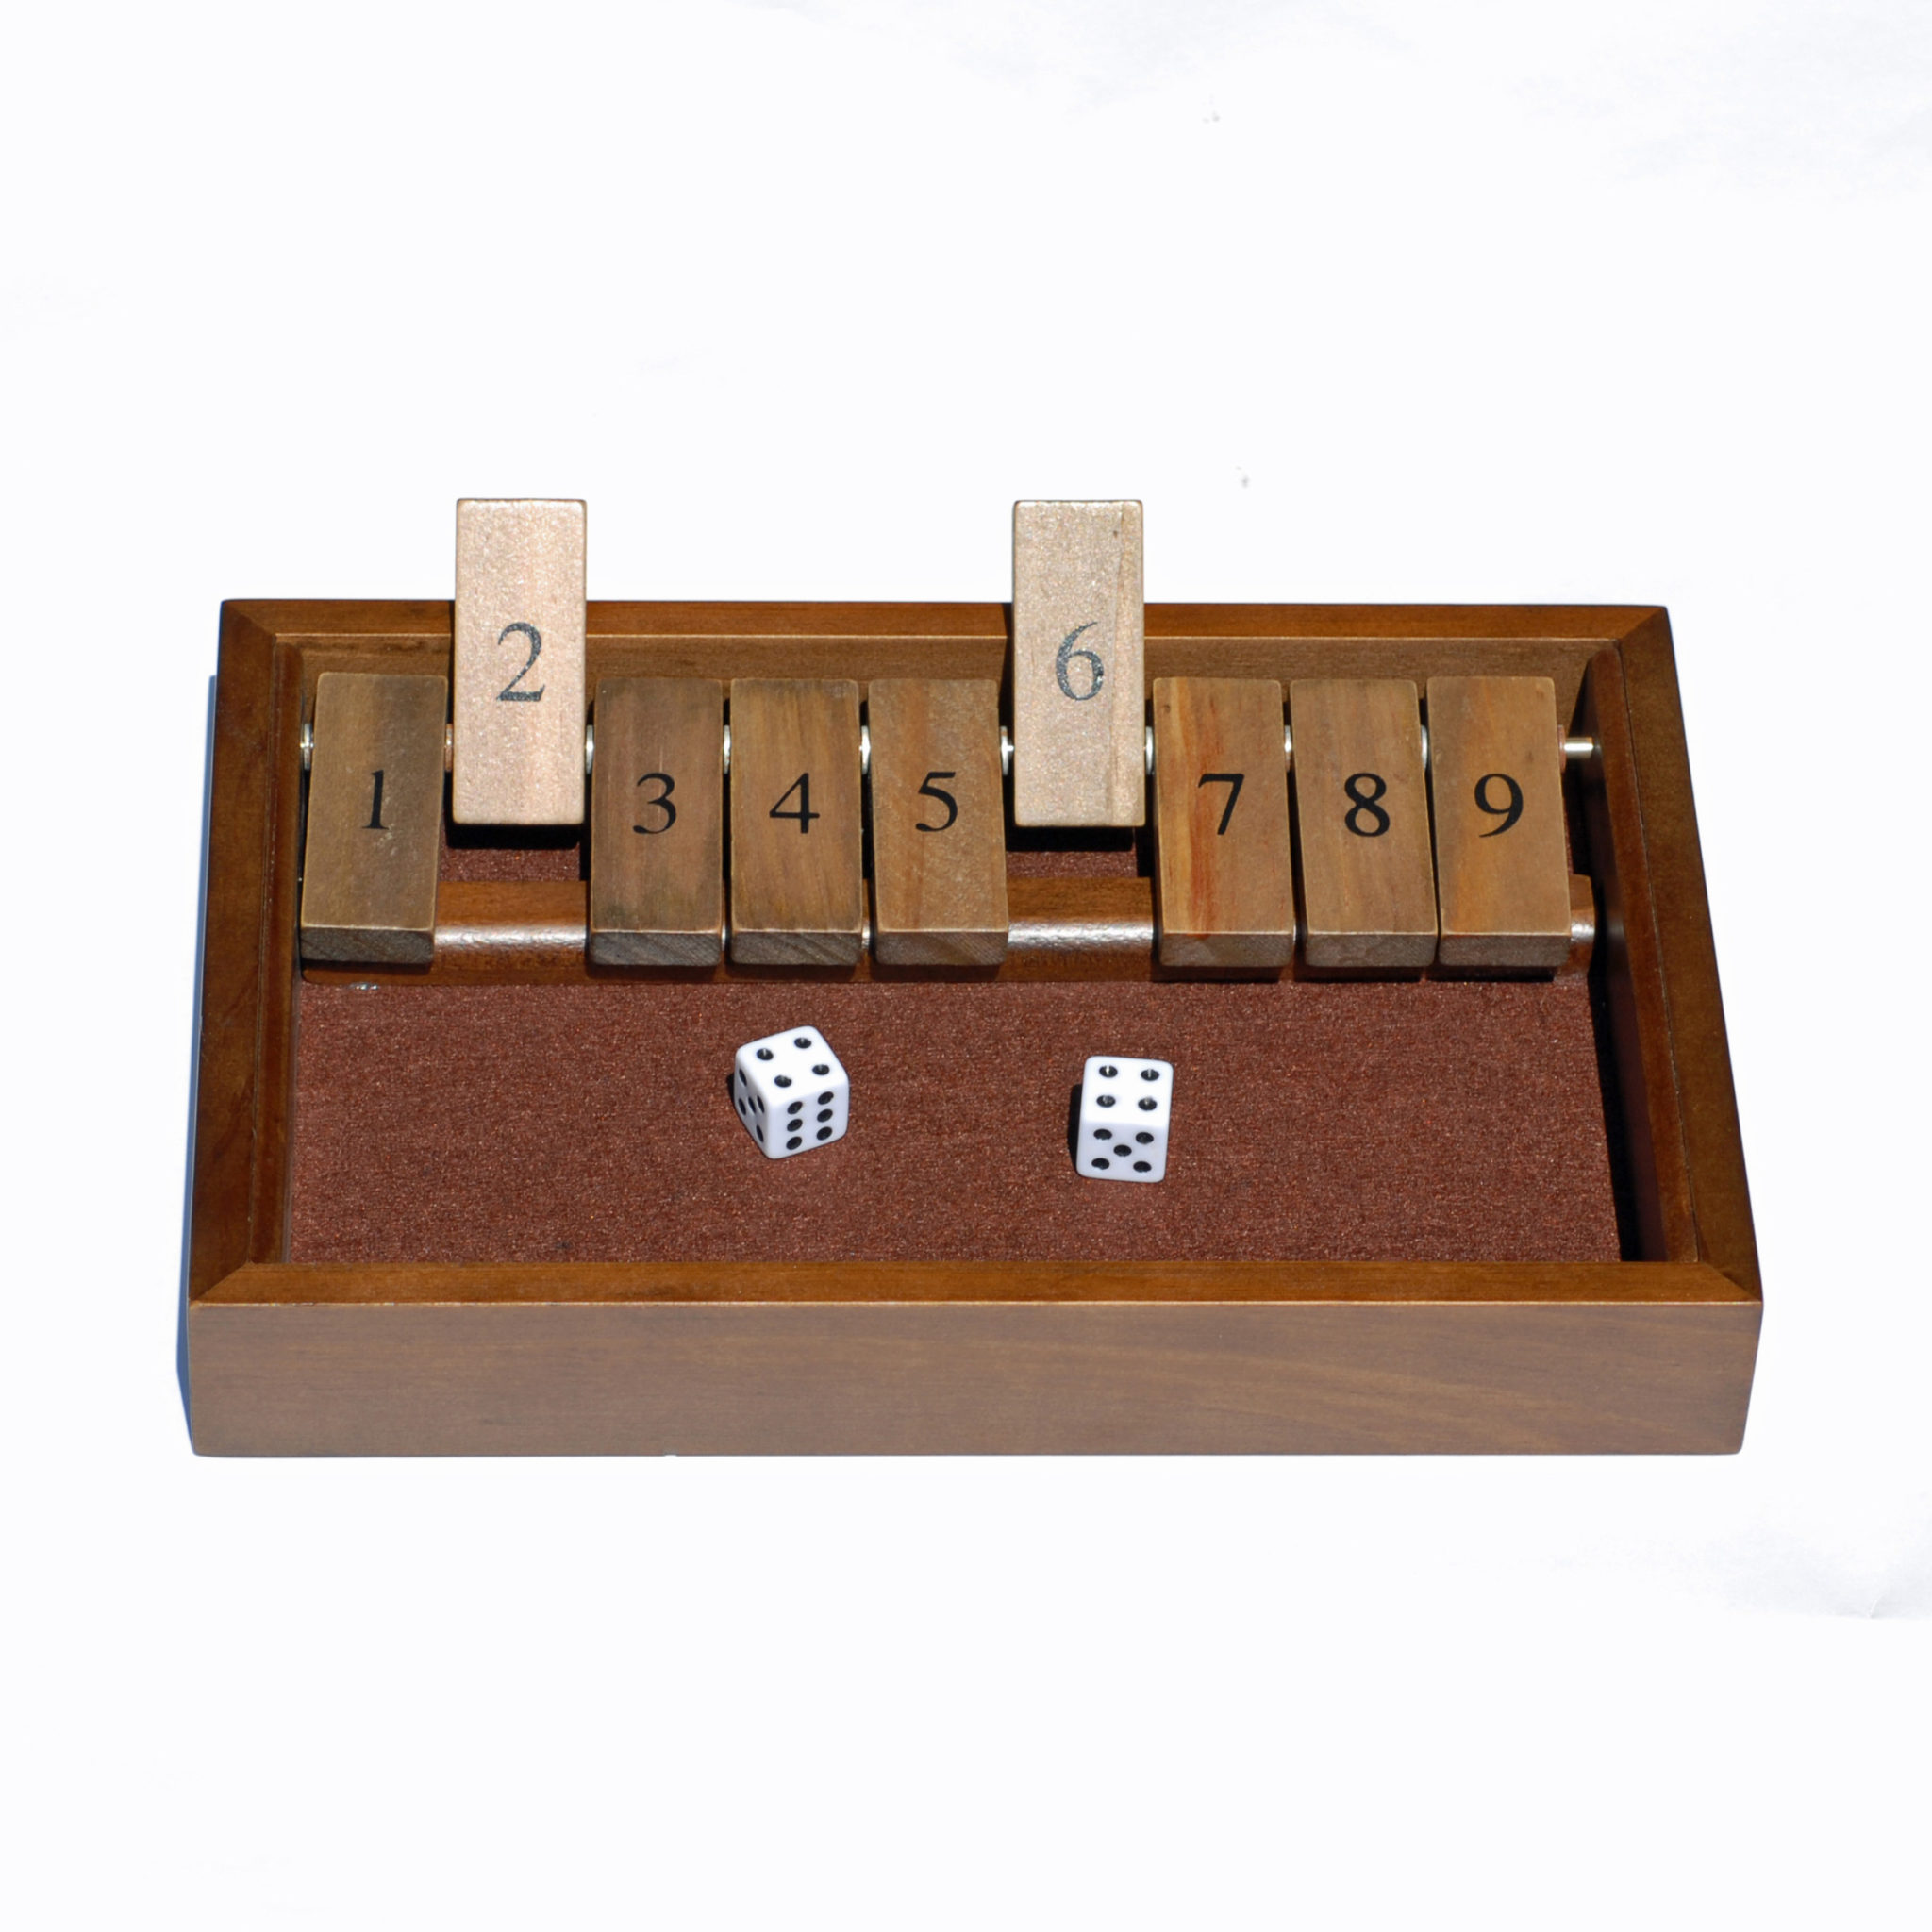 9 Number Shut the Box Board Game Circa Vintage Drinking Pub Dice Wooden Cas·n ZS 